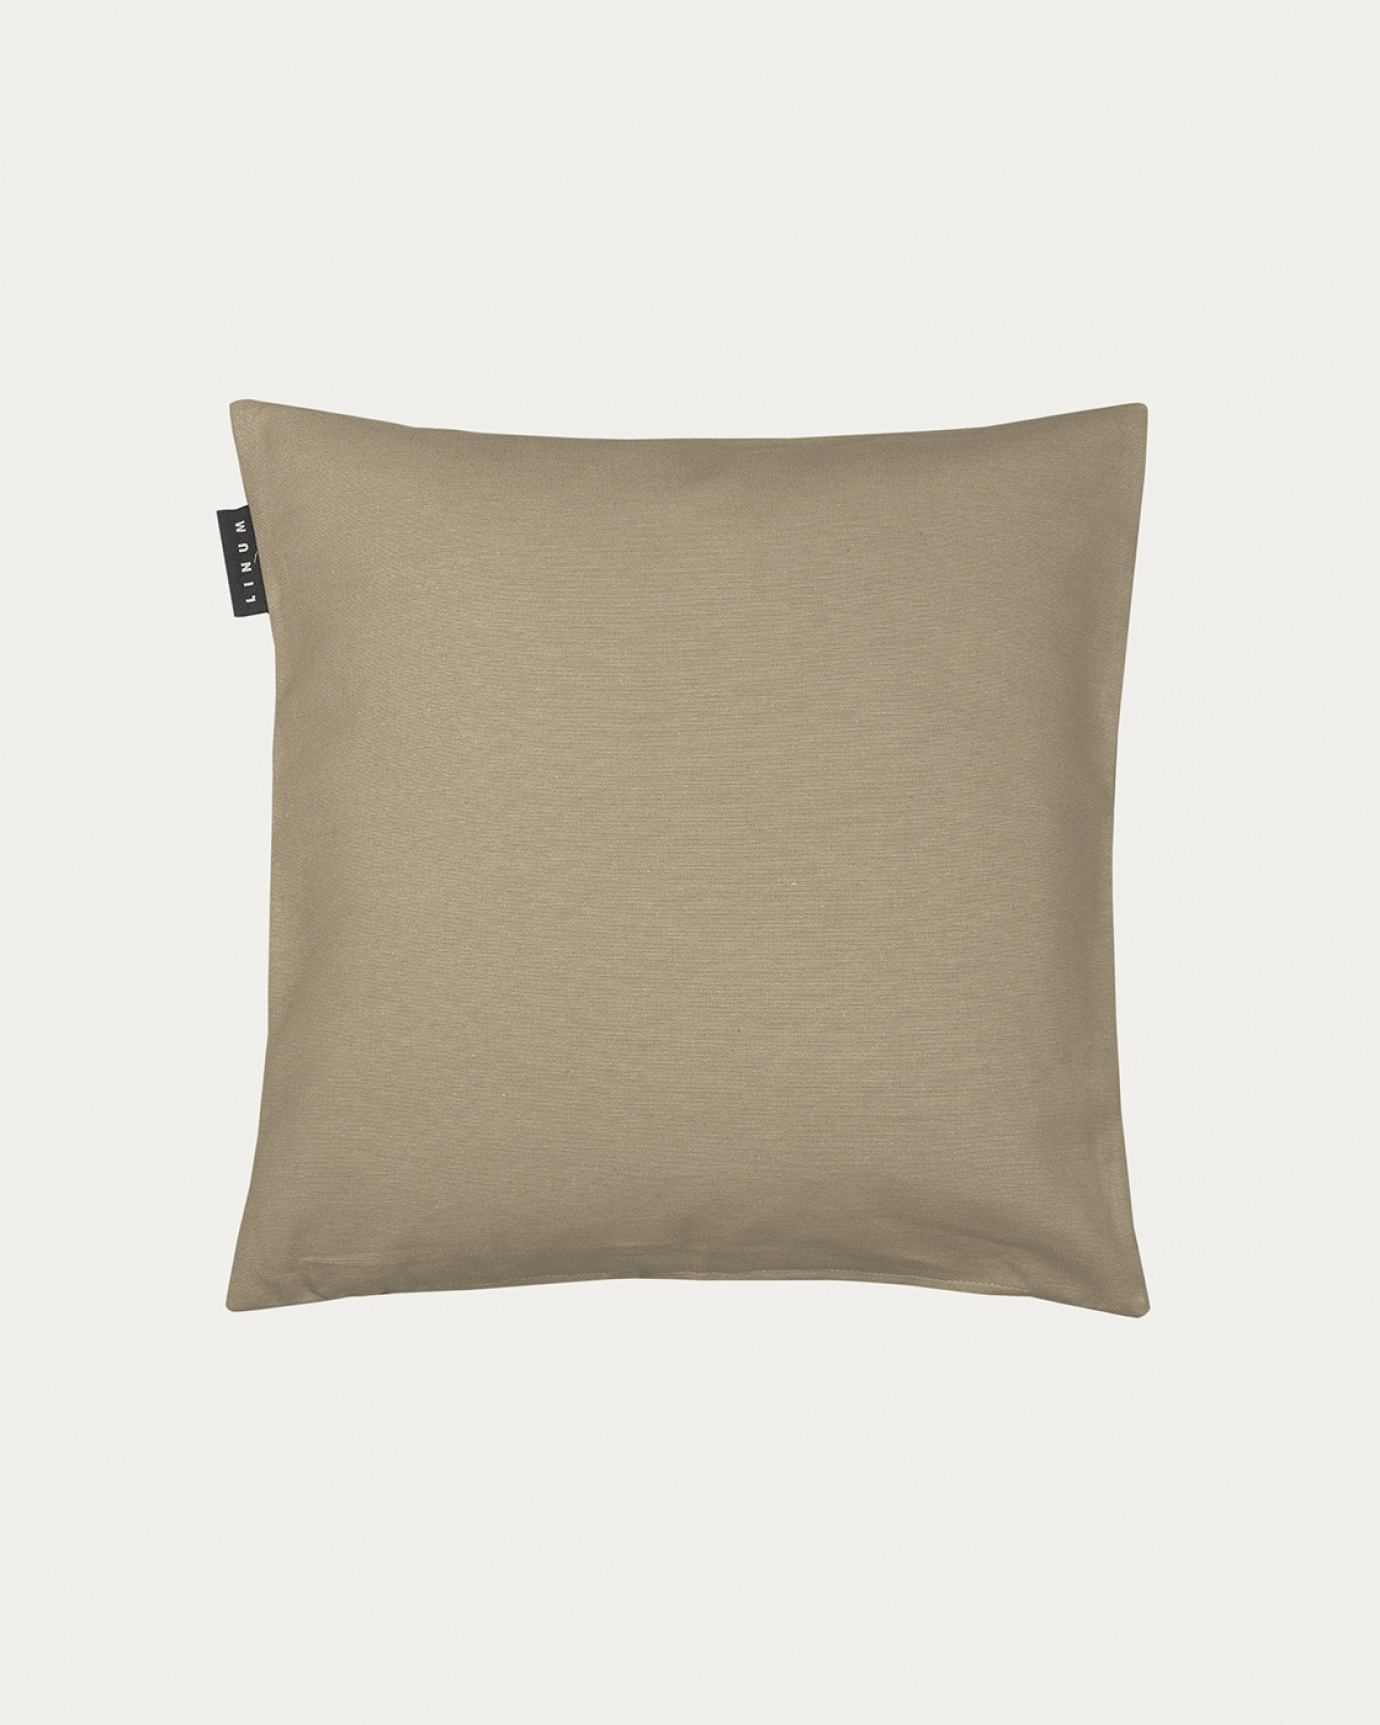 Product image light bear brown ANNABELL cushion cover made of soft cotton from LINUM DESIGN. Size 40x40 cm.